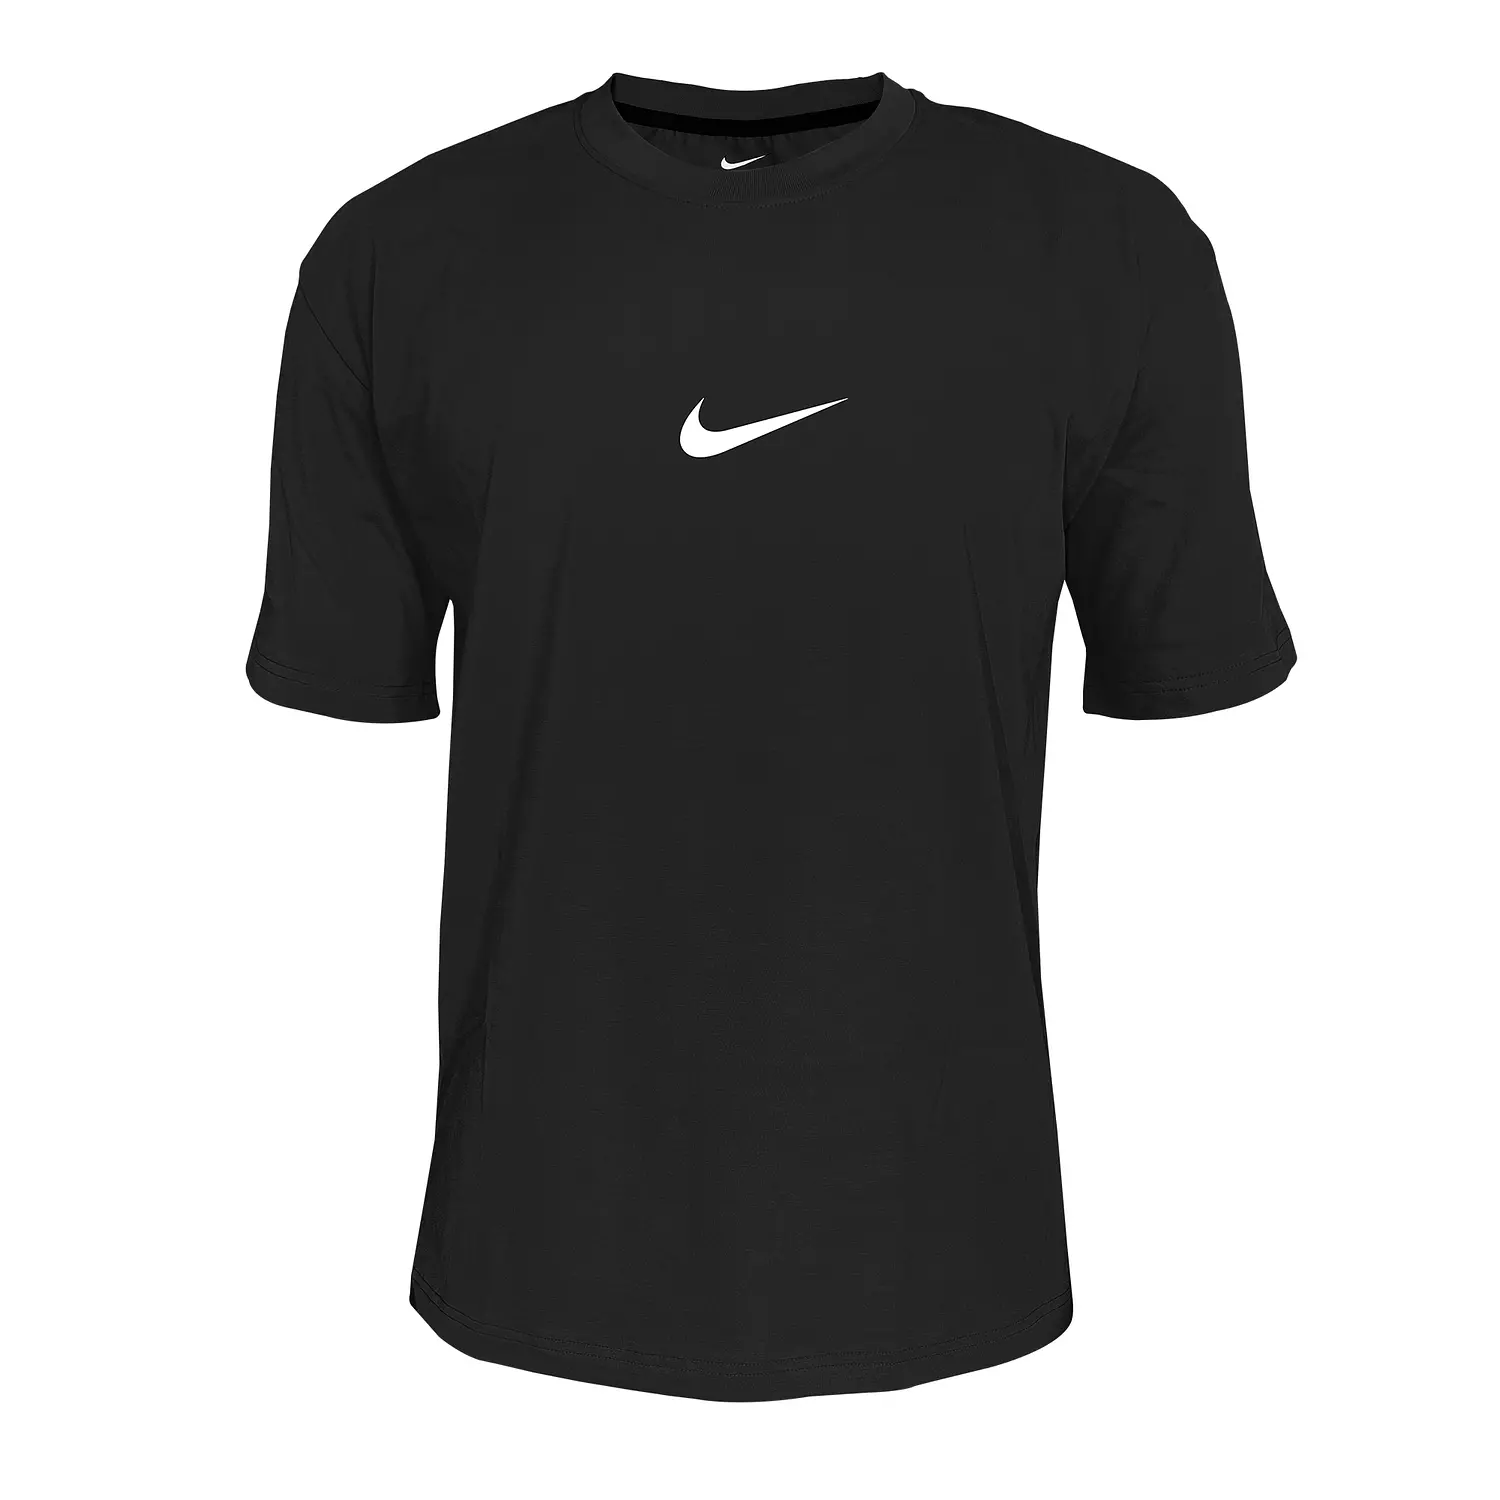 NIKE COTTON T-SHIRT - OVER SIZE hover image